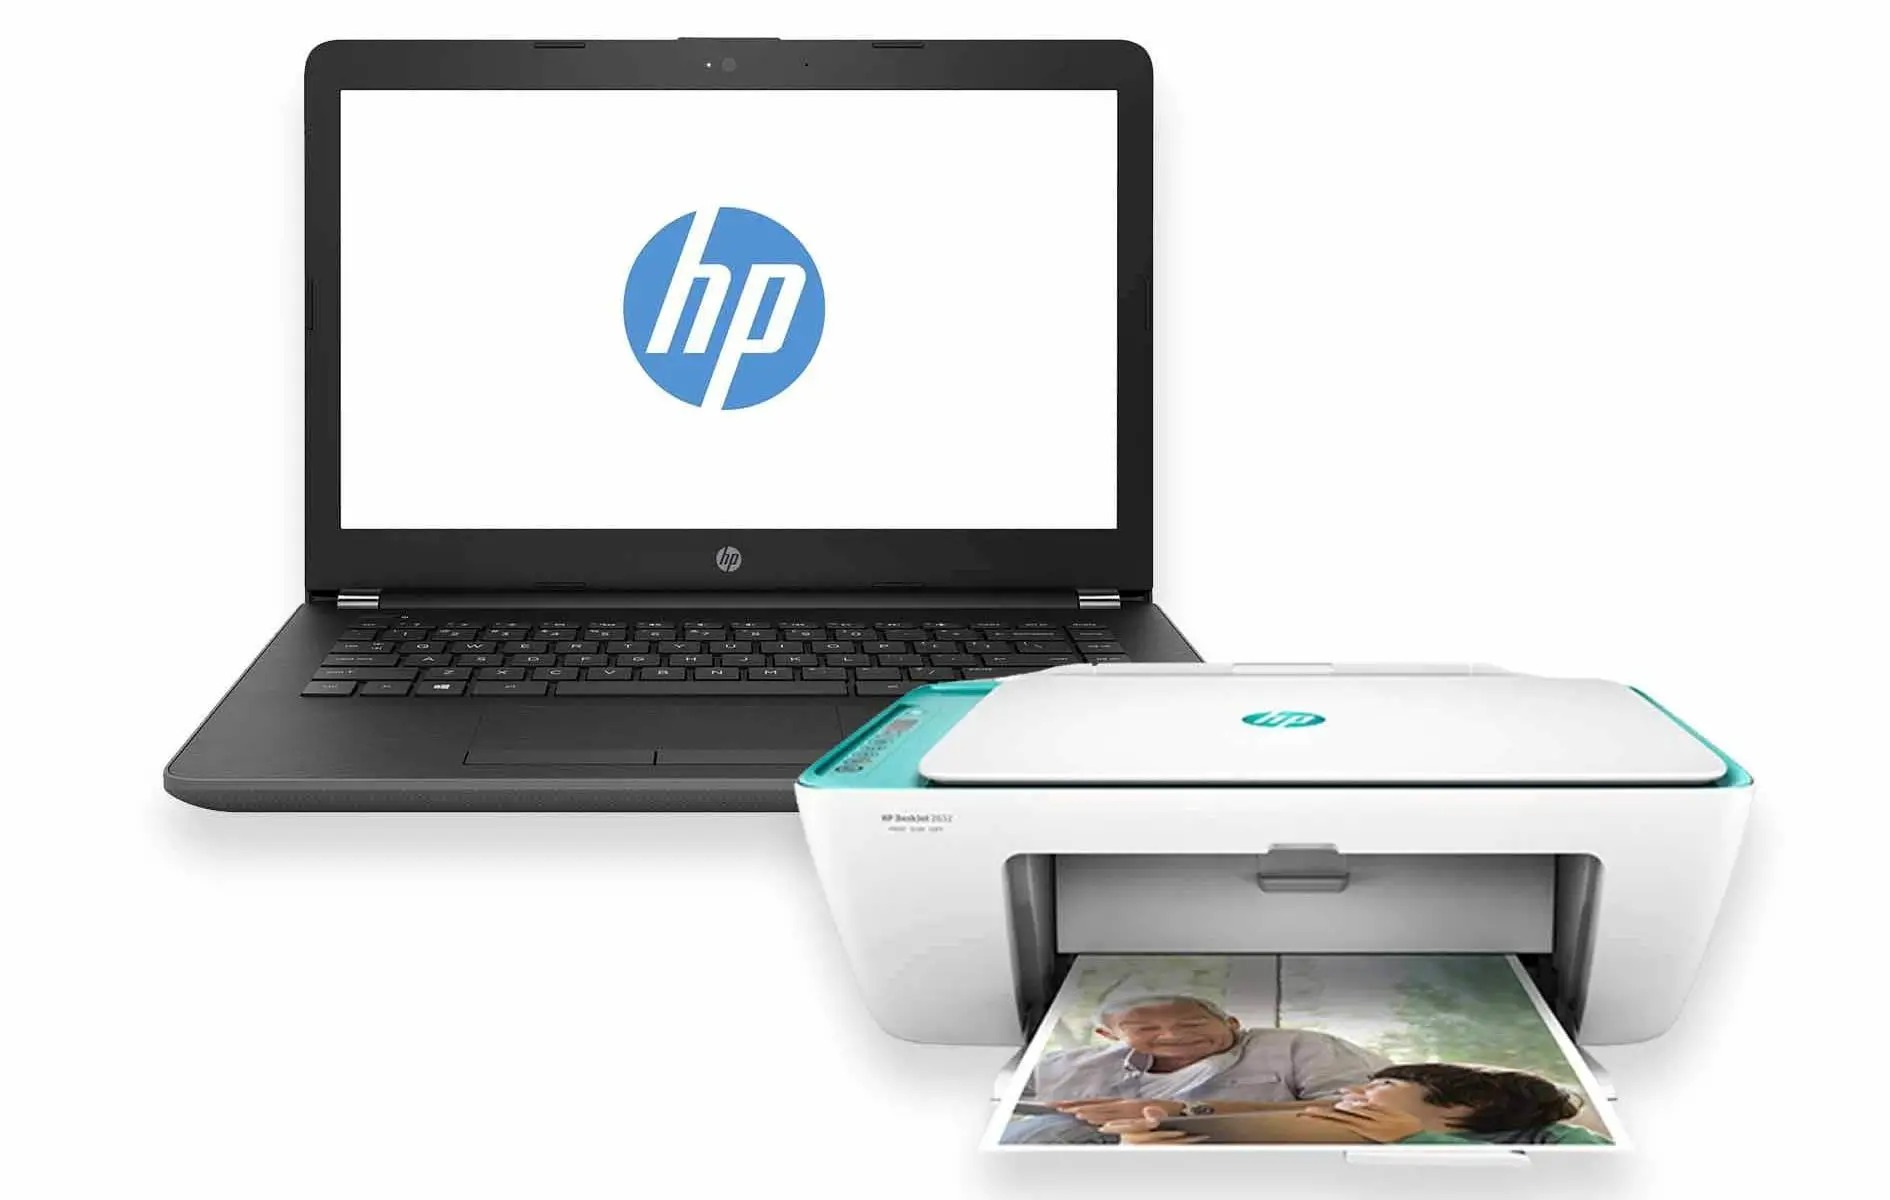 How To Connect A Printer To A Laptop Wirelessly